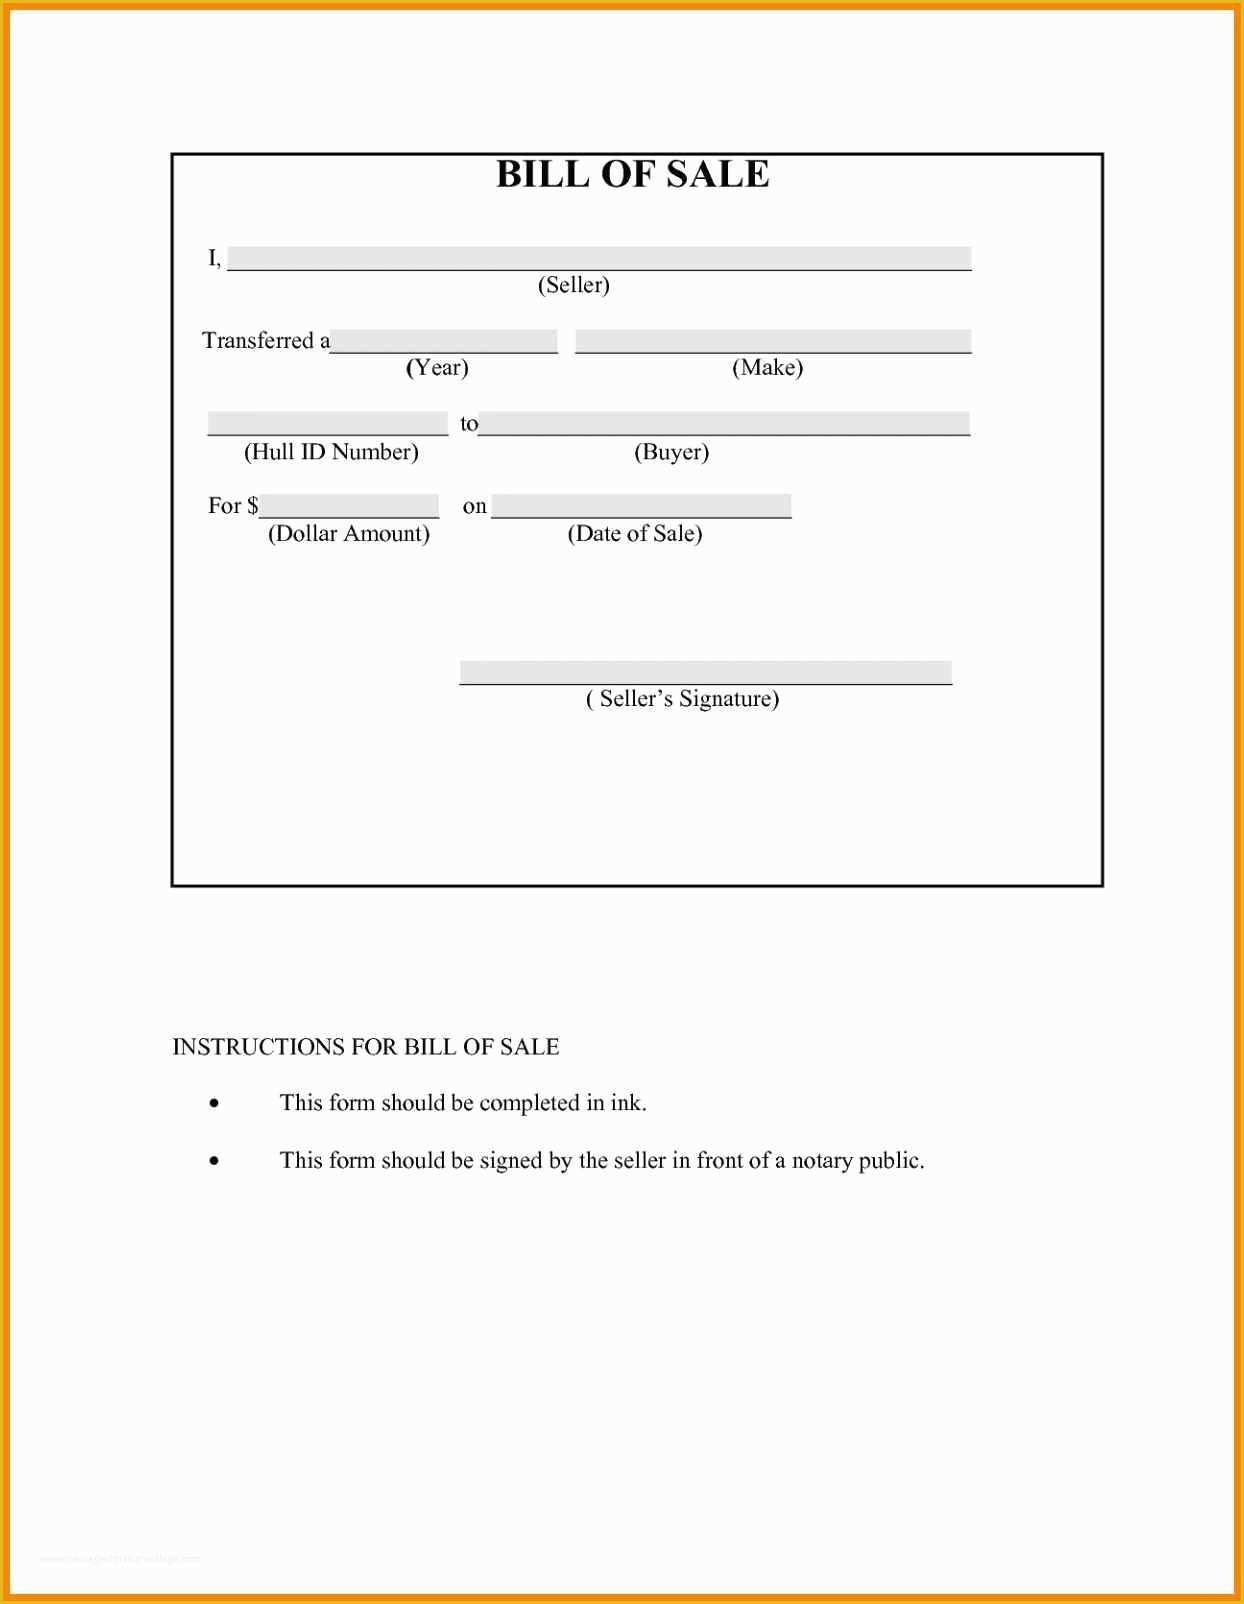 Auto Insurance Card Template Free Download Of Insurance Card Template with regard to Auto Insurance Card Template Free Download